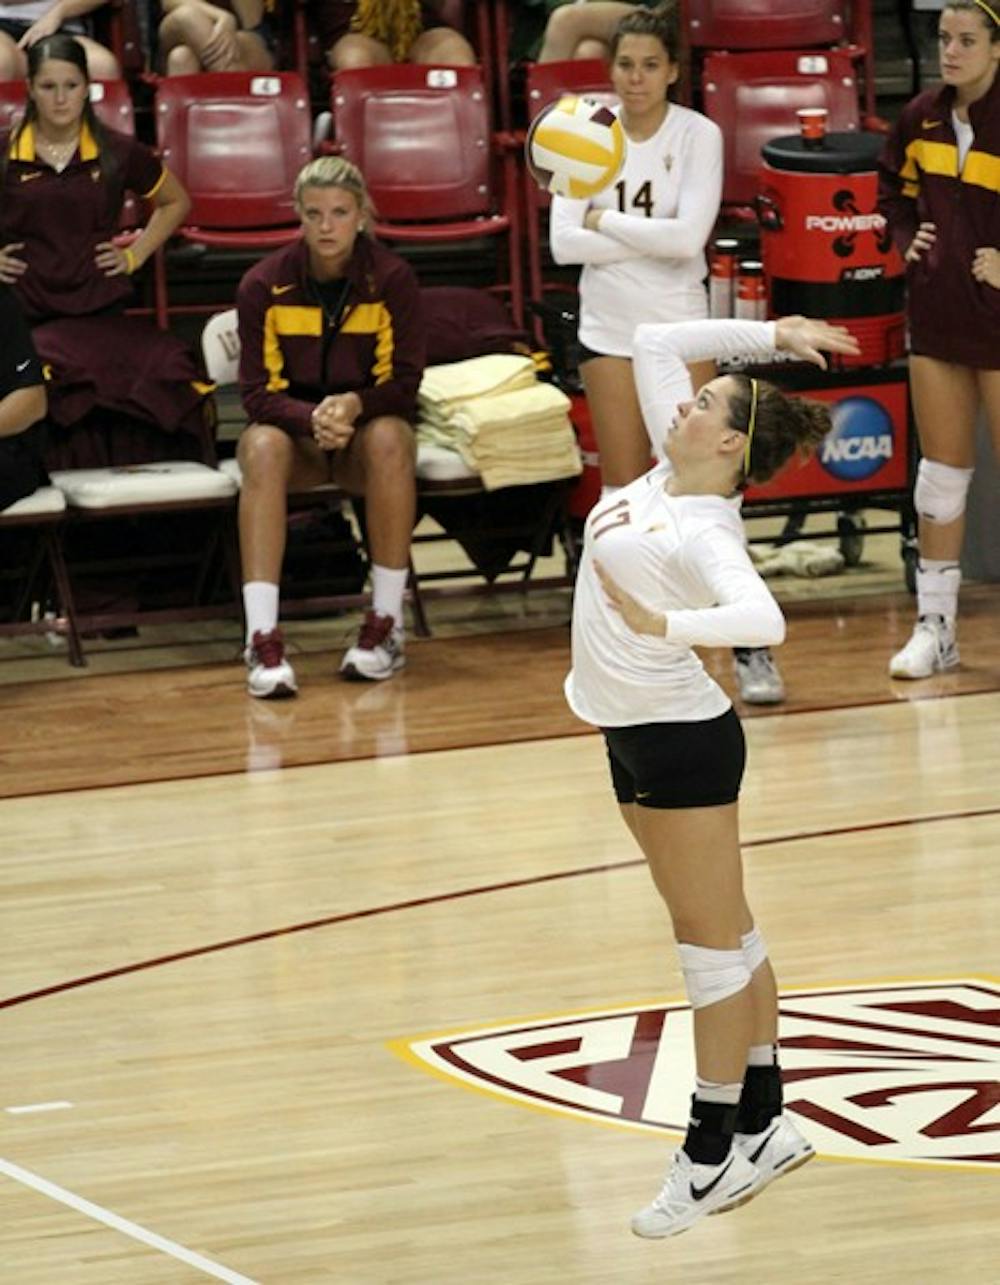 GOING WEST: Sophomore outside hitter Bethany Jorgensen serves the ball in the Sun Devils’ meeting against Washington on Sunday. The ASU volleyball team takes on a difficult road stretch over the weekend, facing No. 6 Stanford and No. 4 California. (Photo by Lisa Bartoli)